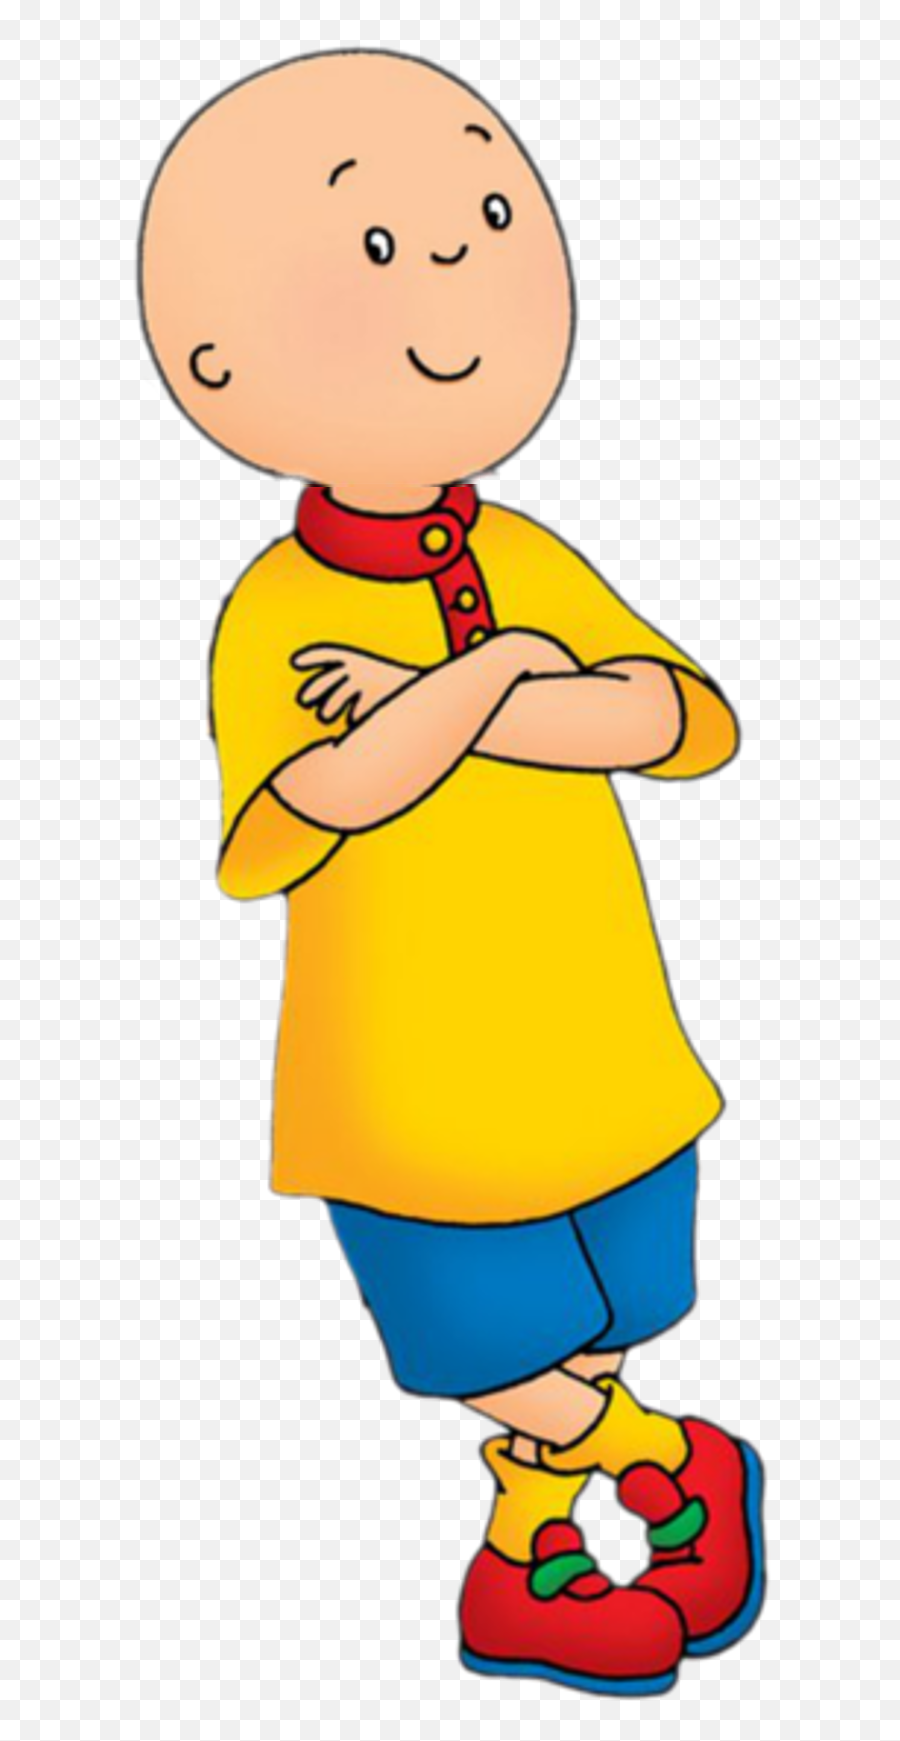 Loathsome Characters Wiki - Caillou Cartoon Emoji,Caillou Png